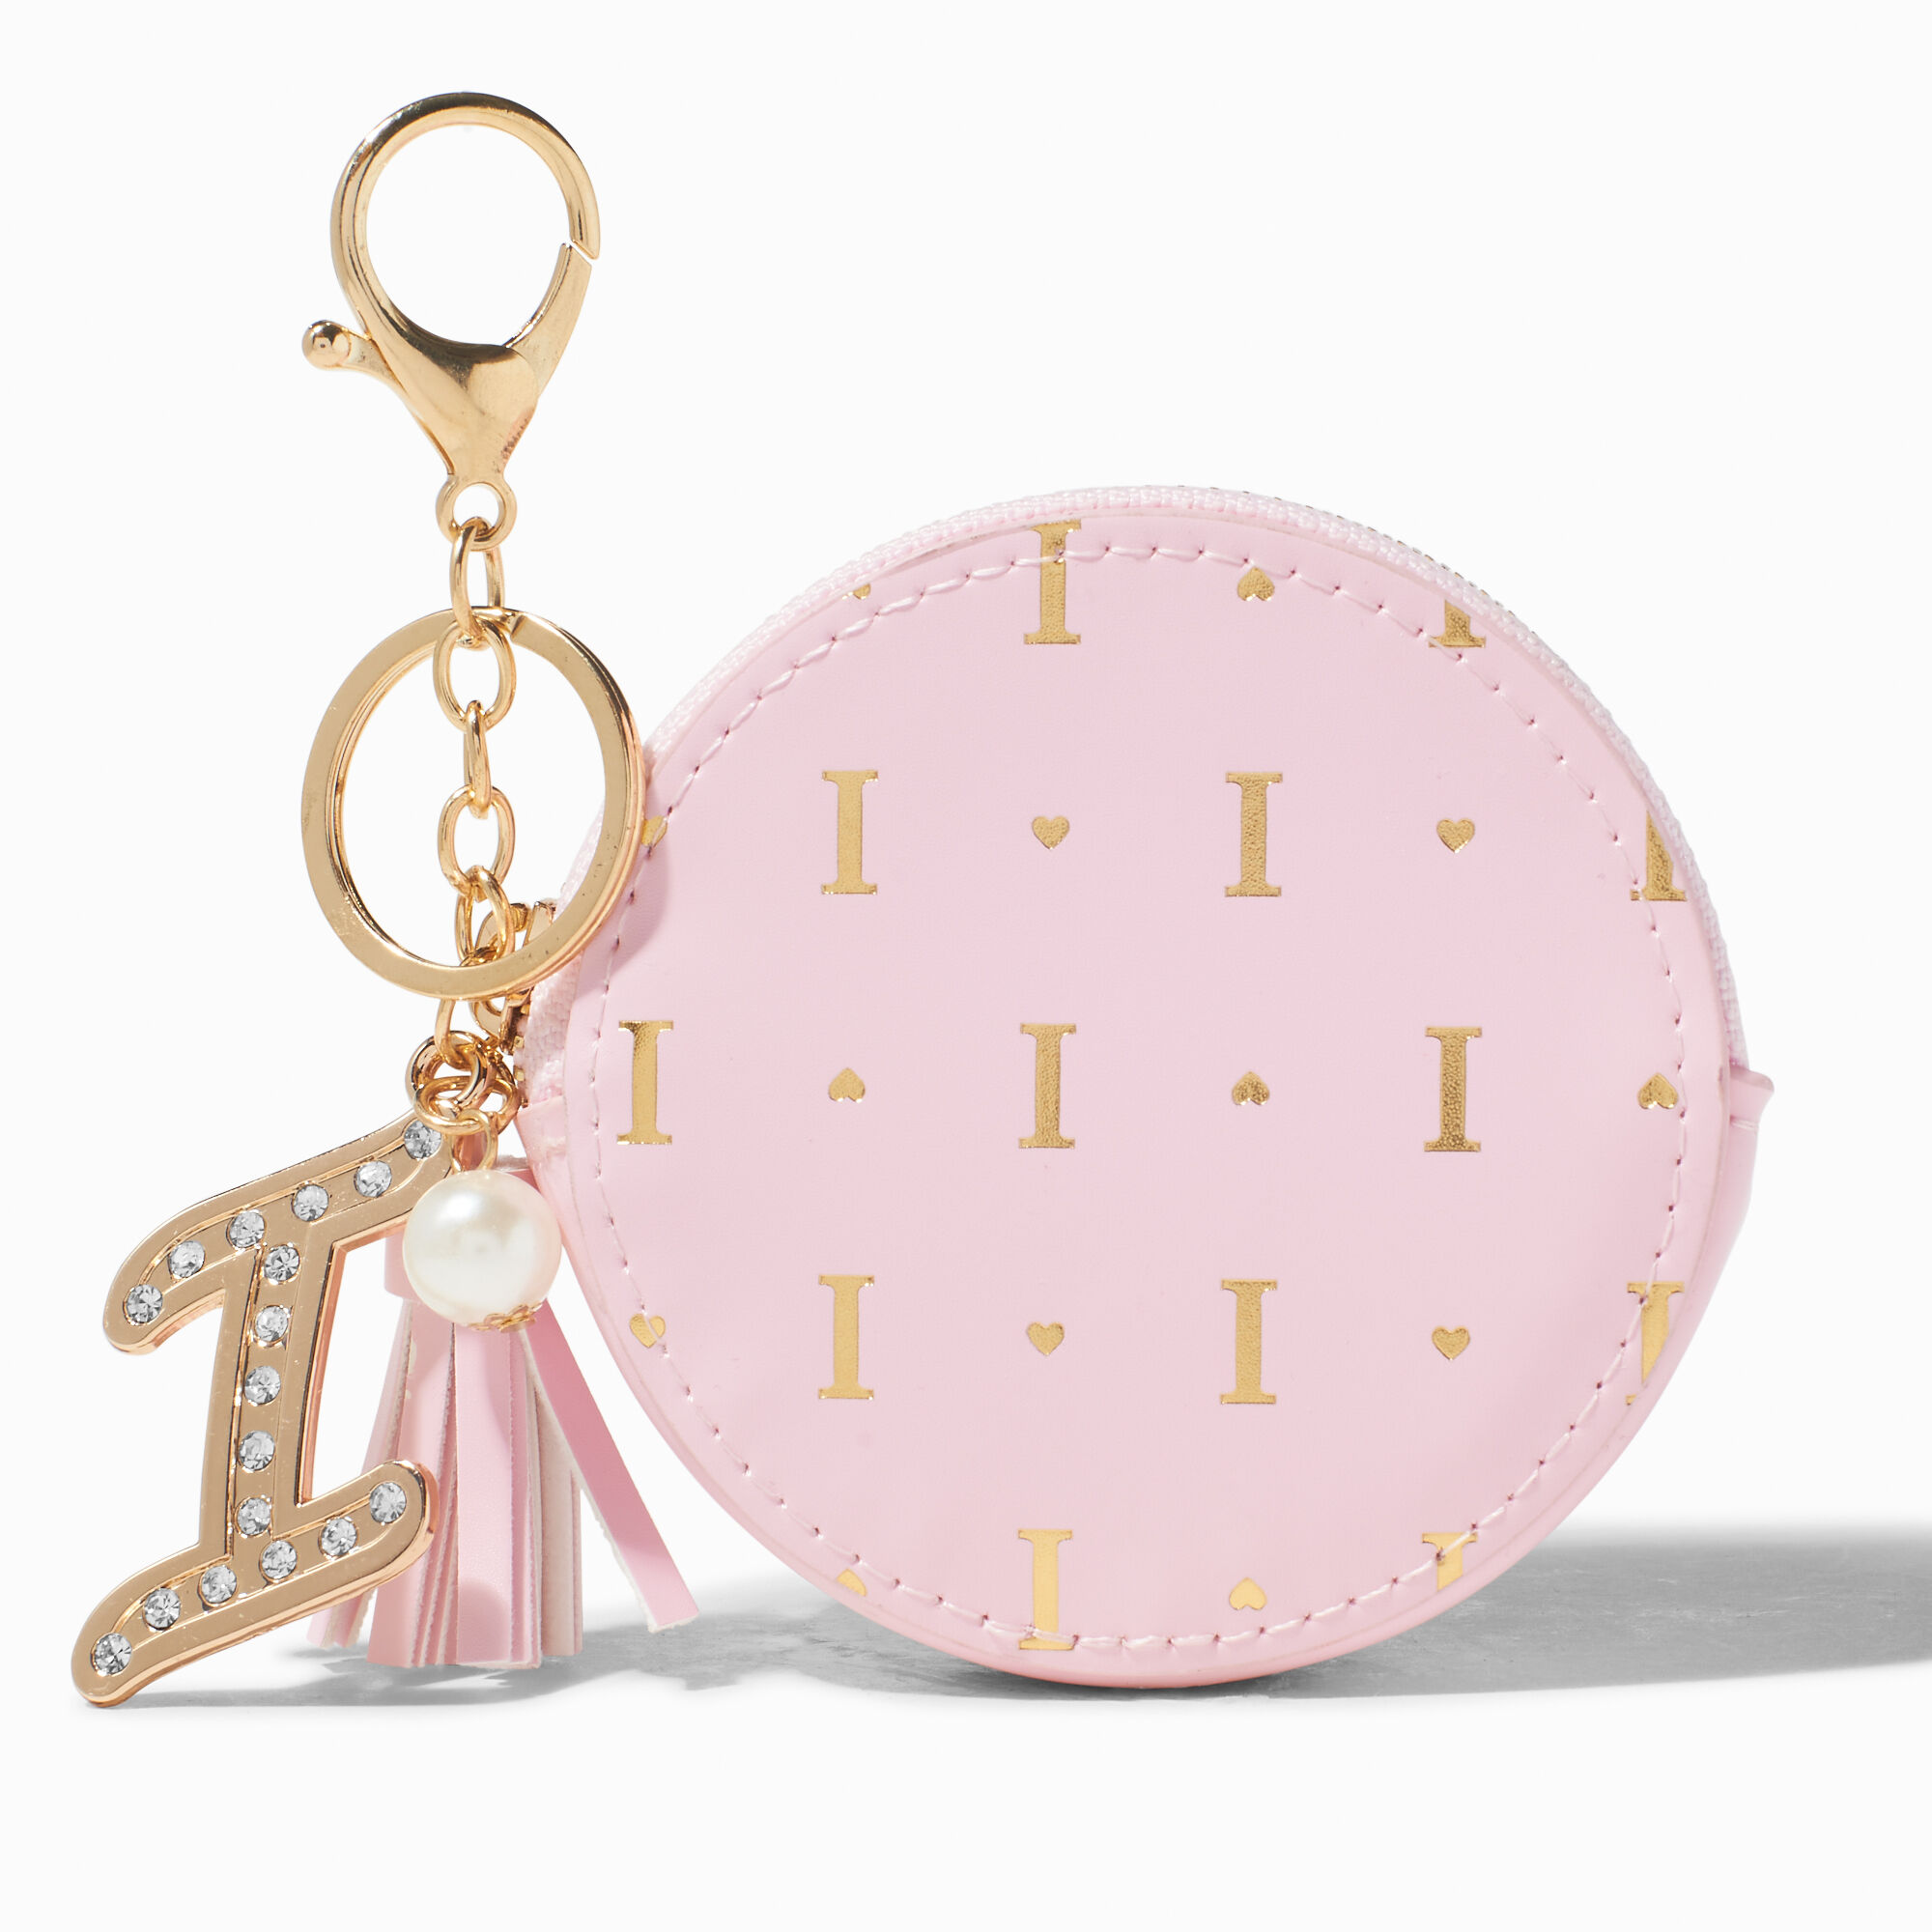 View Claires en Initial Coin Purse I Gold information